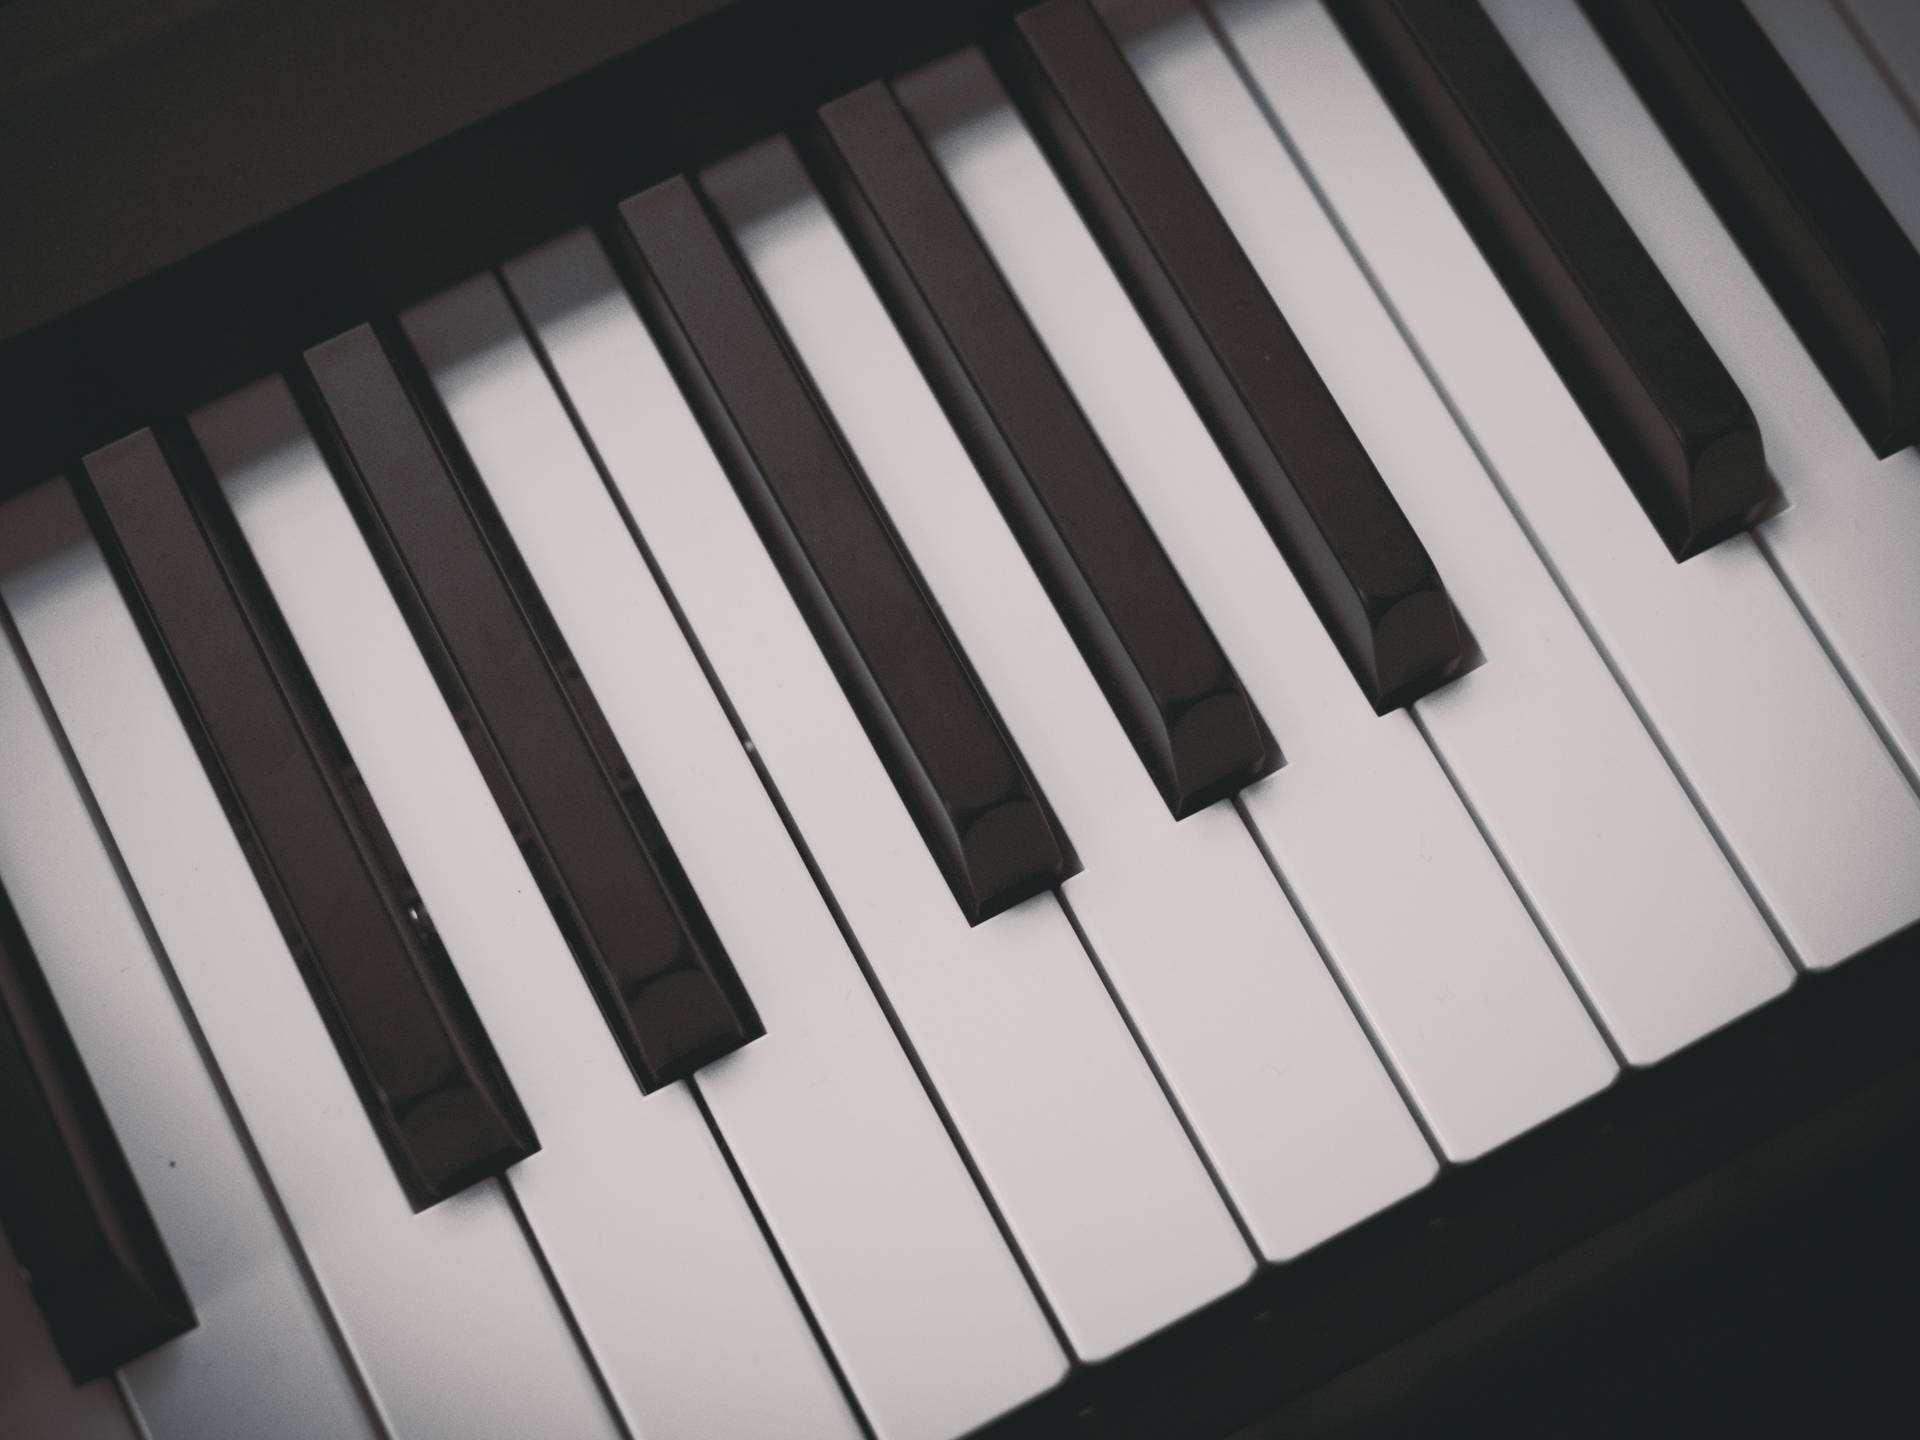 Piano Keyboard Aerial View Background